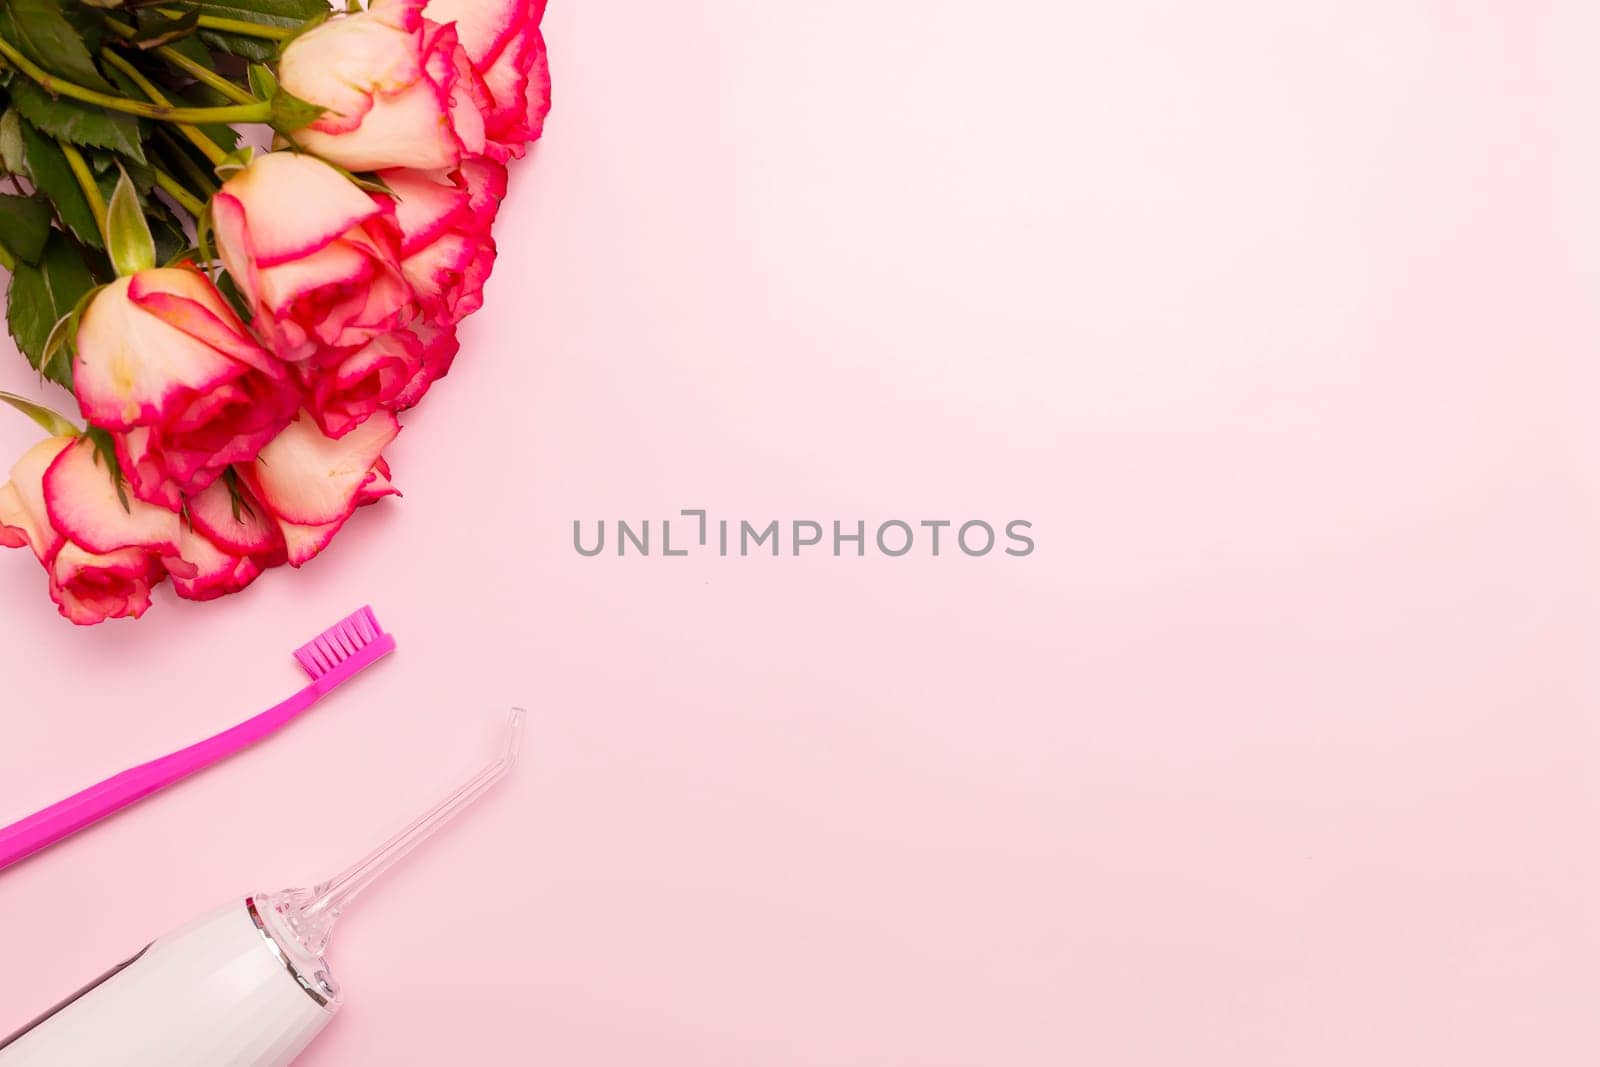 Happy International Dentist Day rose flowers, oral teeth irrigator, toothbrush on pink background mockup. Dental care. Greeting card for professional holiday. Copy space, horizontal. by netatsi